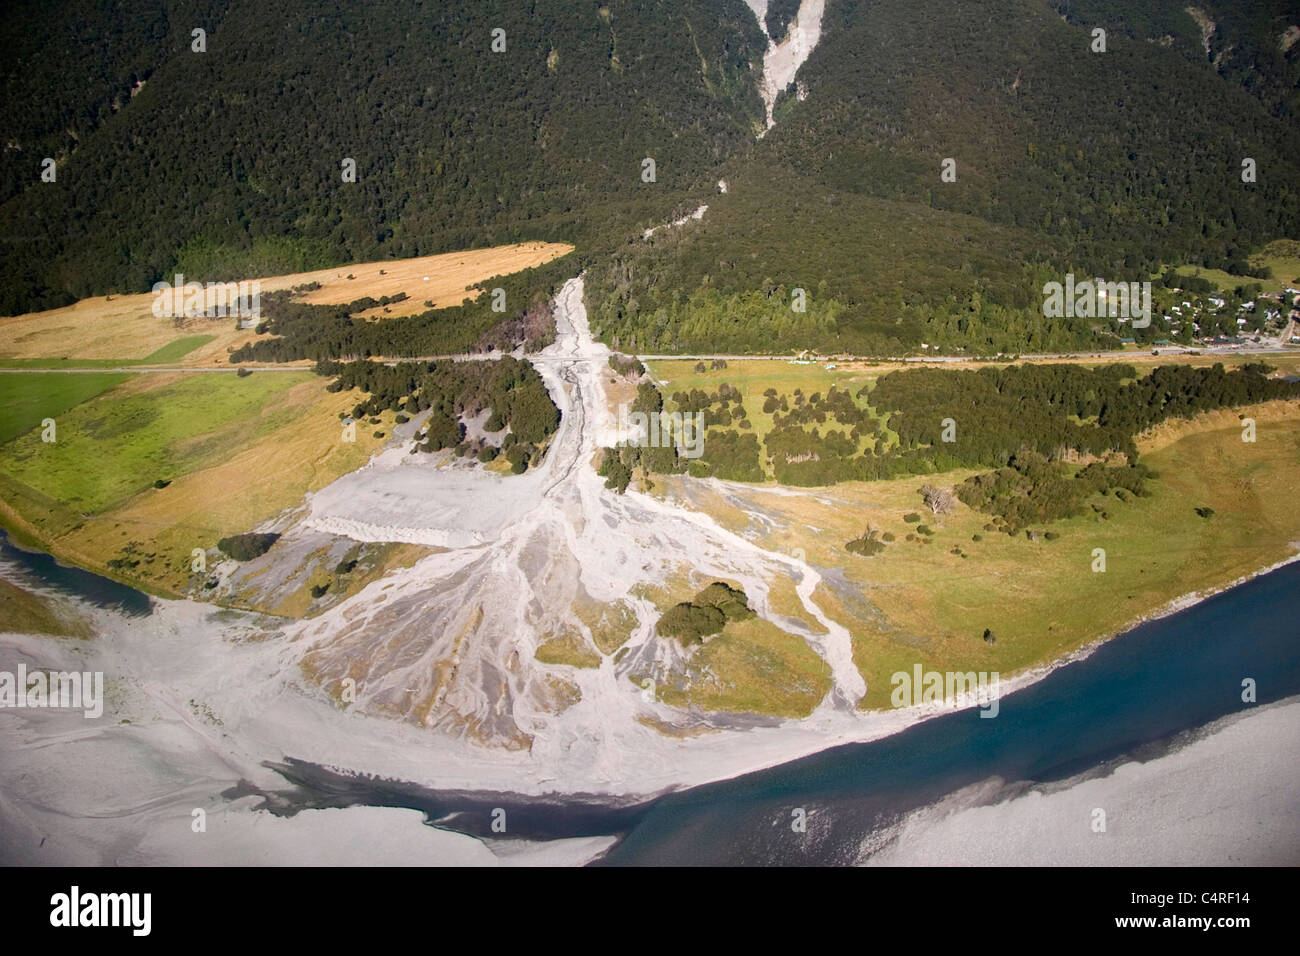 Aerial view of South Island and Shotover River, Milford Sound, New Zealand Stock Photo